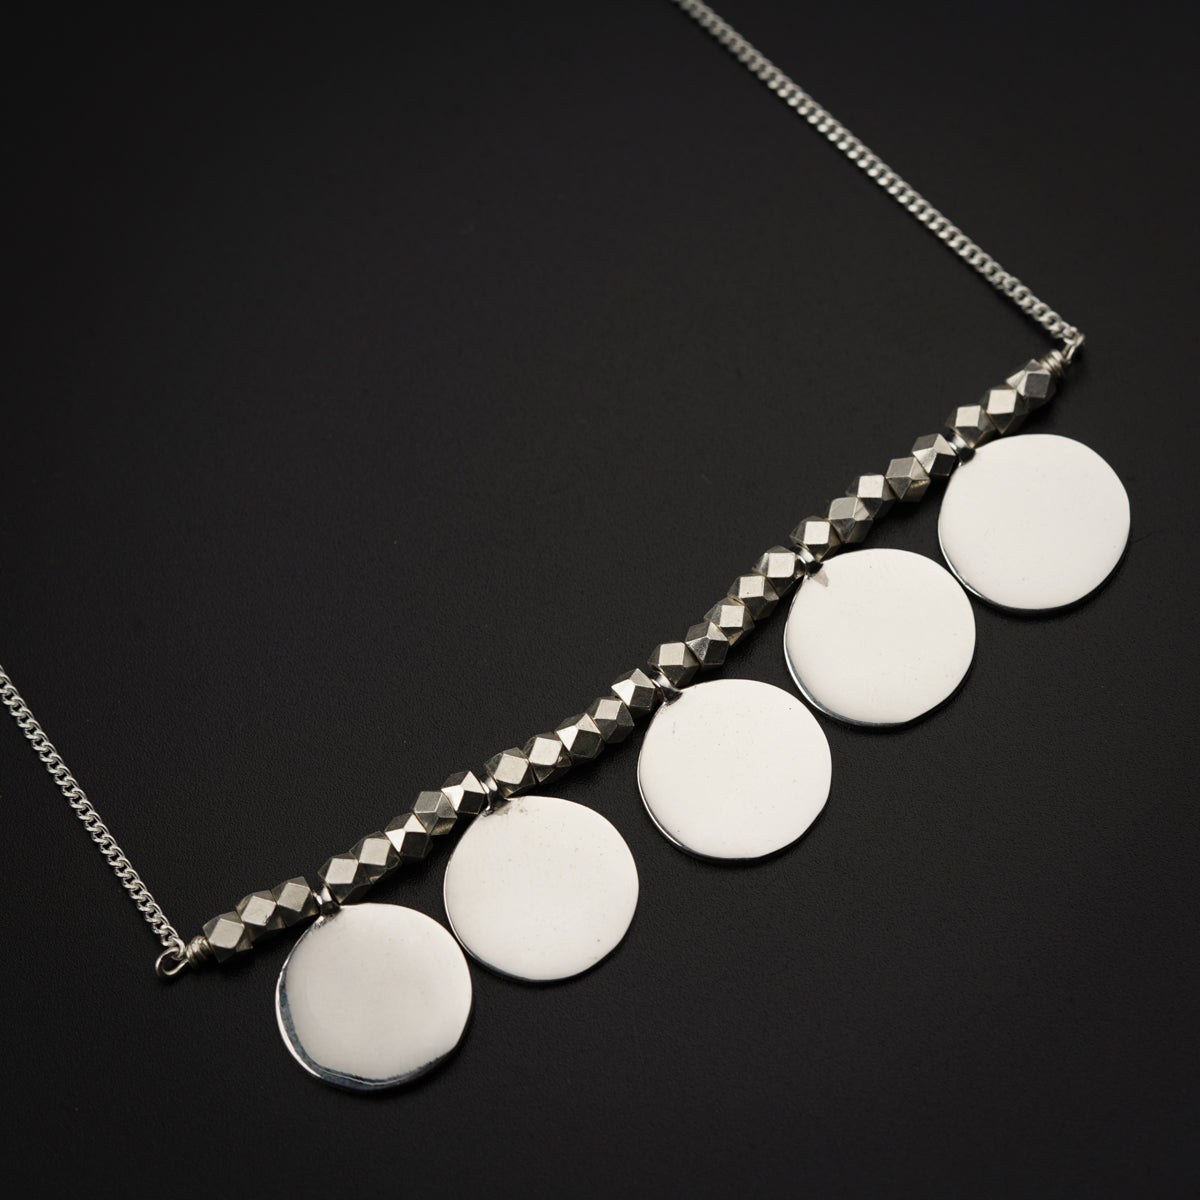 a silver necklace with five discs on it